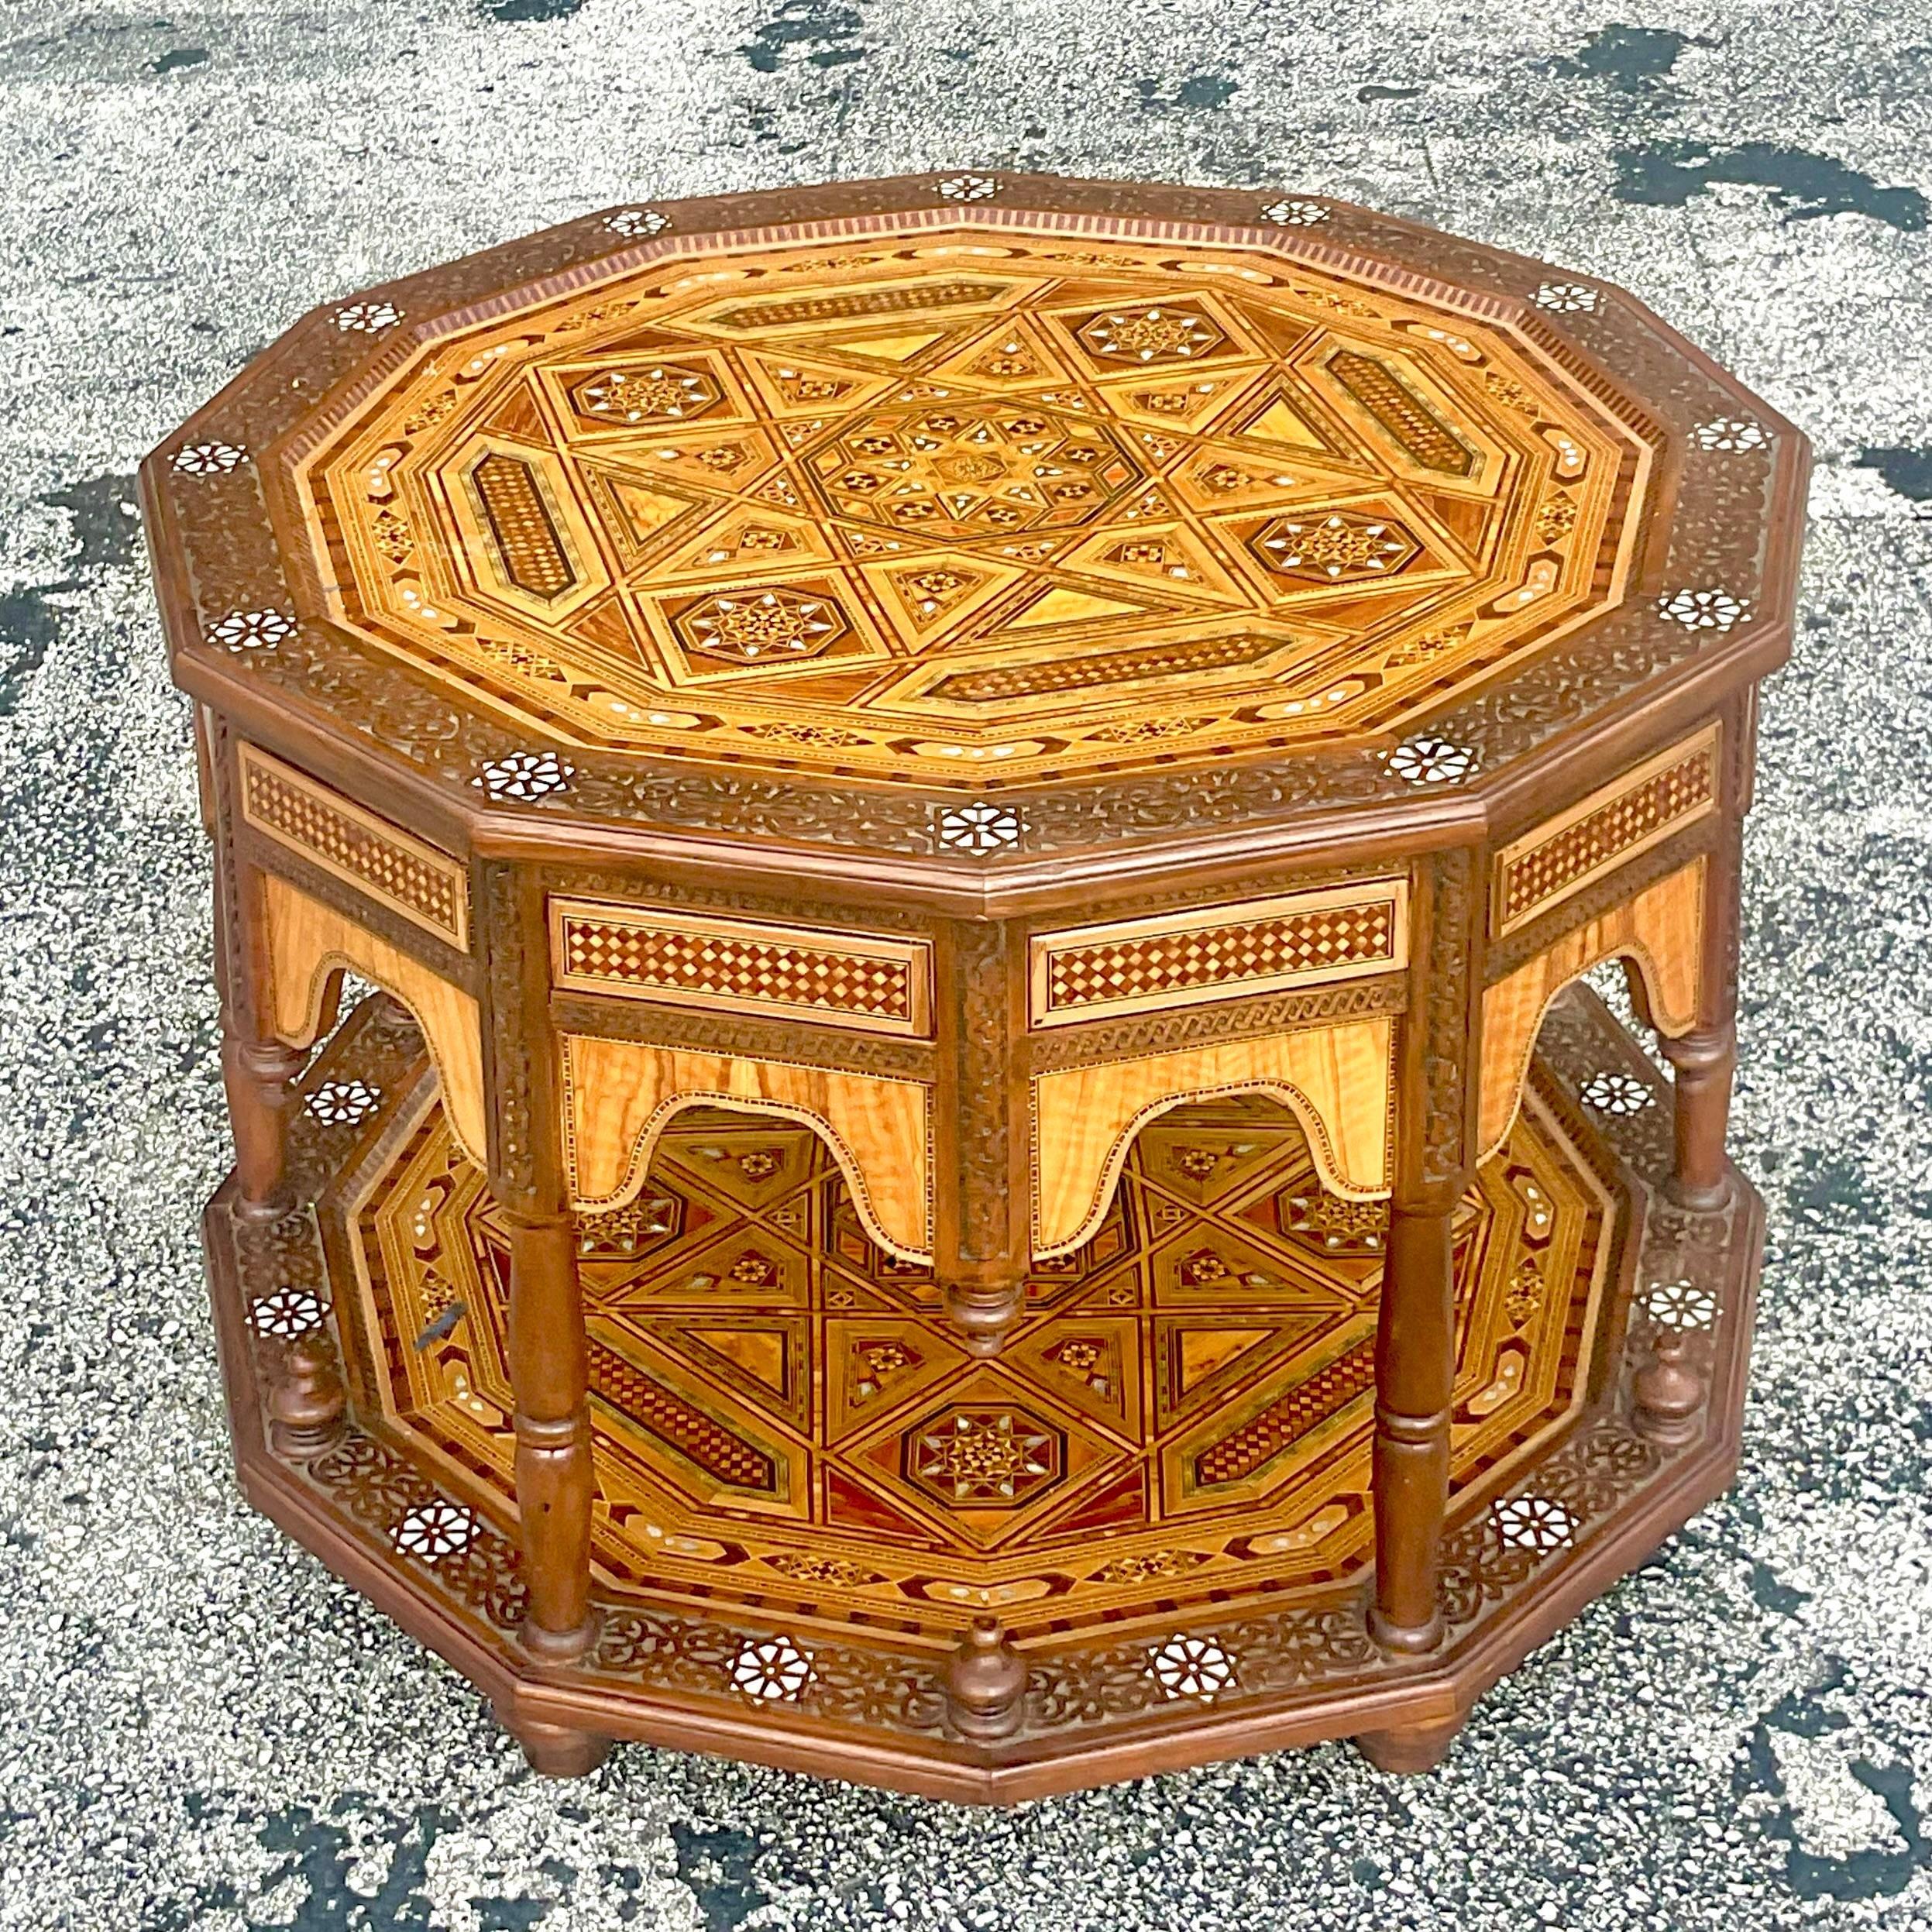 An extraordinary vintage Boho coffee table. A chic Moroccan style with incredible inlay detail. Acquired from a Palm Beach estate.